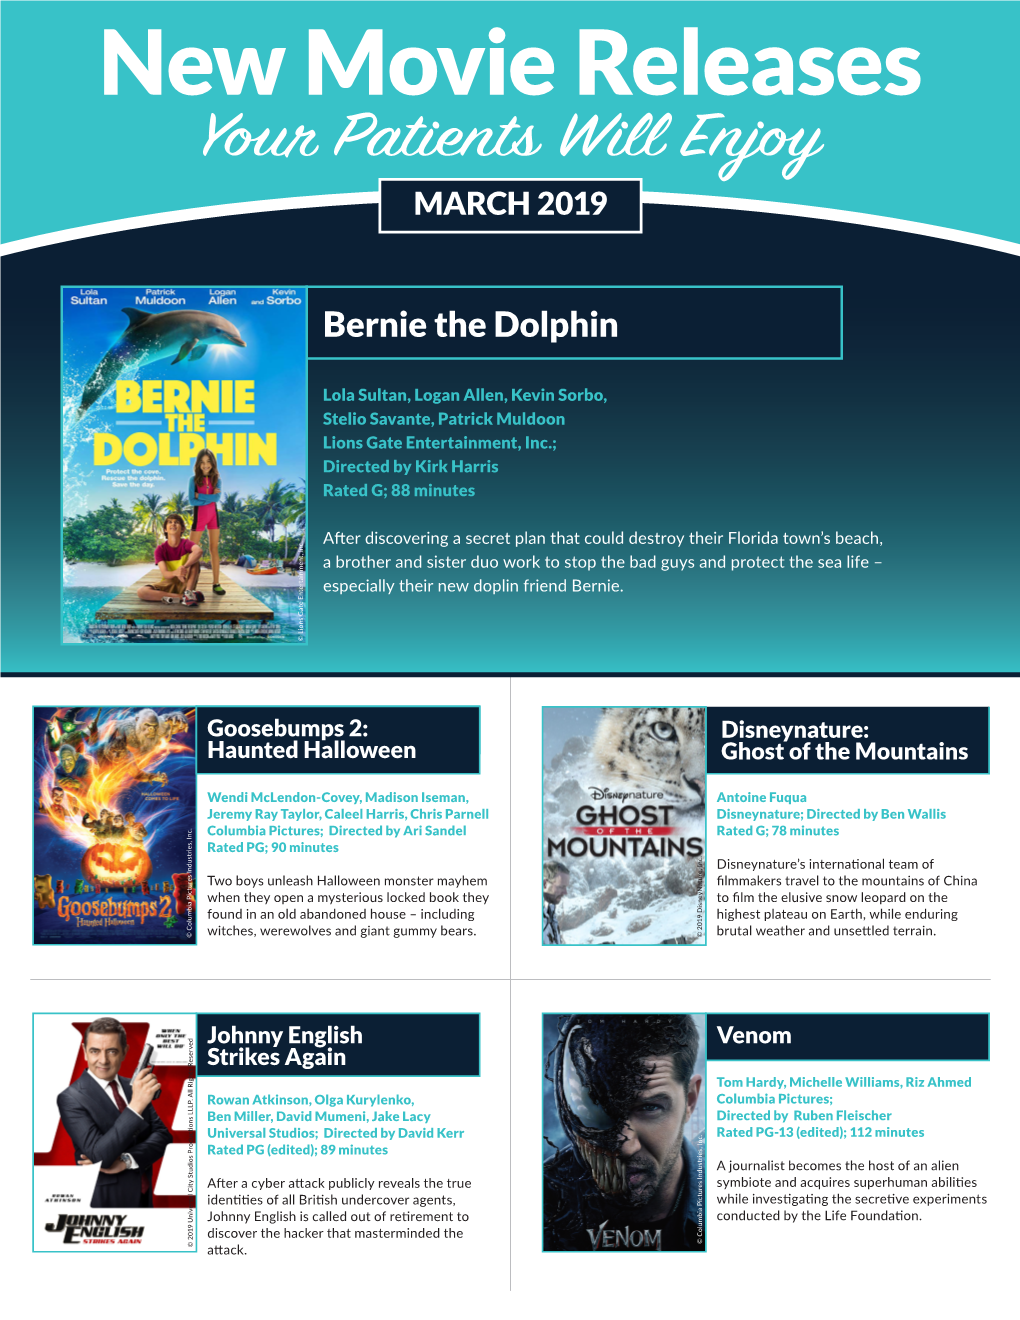 New Movie Releases Your Patients Will Enjoy MARCH 2019